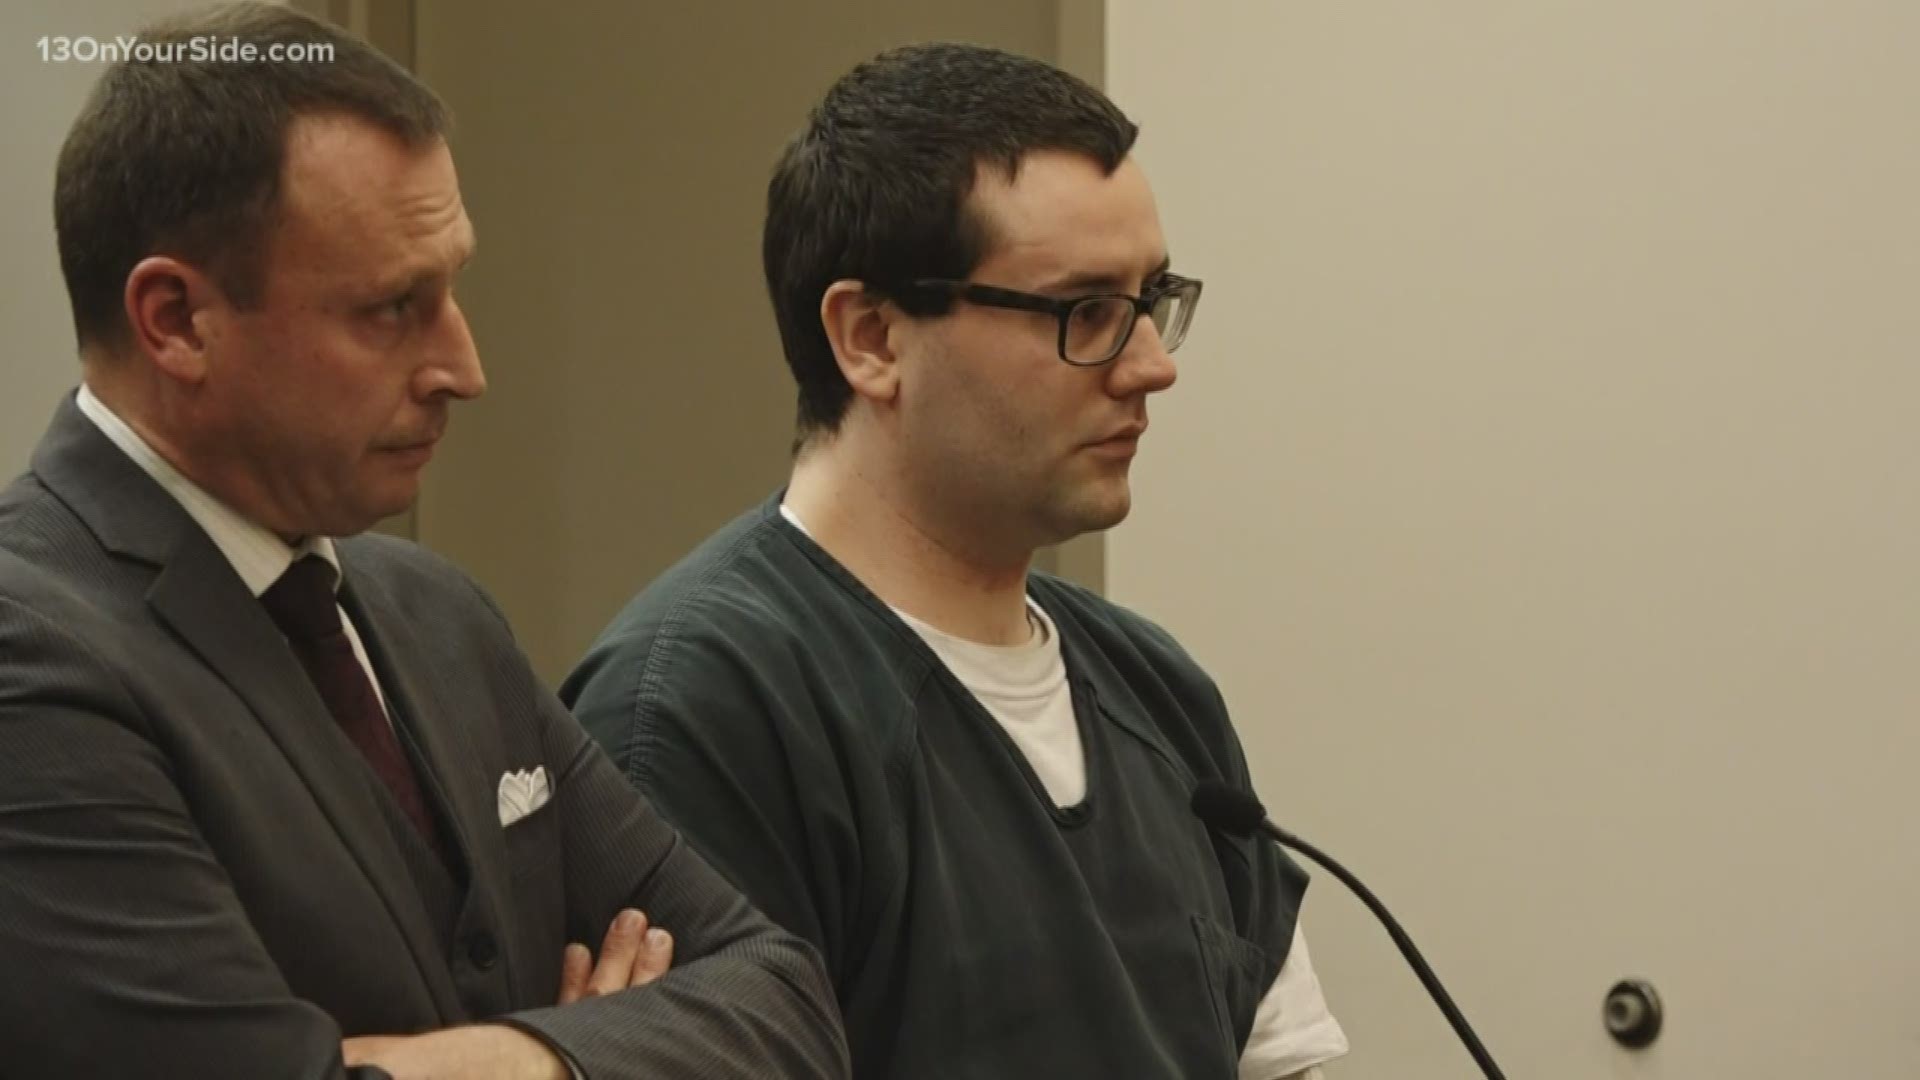 Matthew Doyle, 29, told investigators he shook his baby "side to side" until the child lost consciousness.